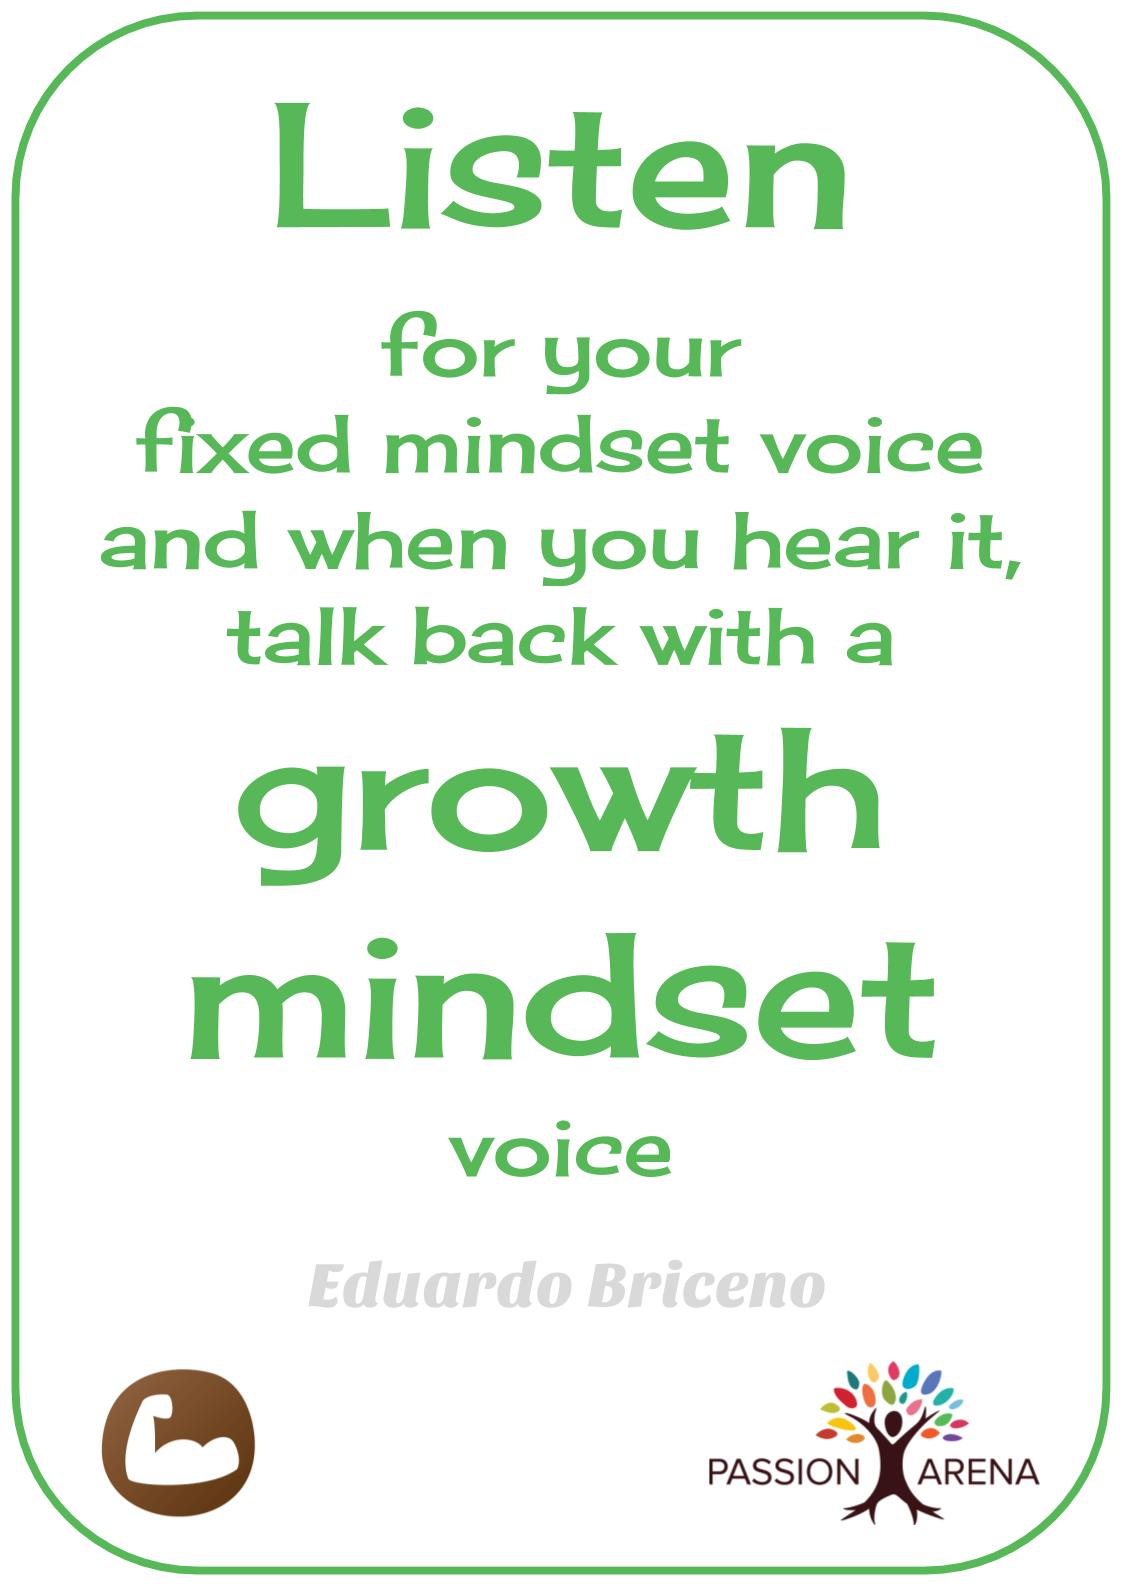 Intro-1-6. How can you create a growth mindset?